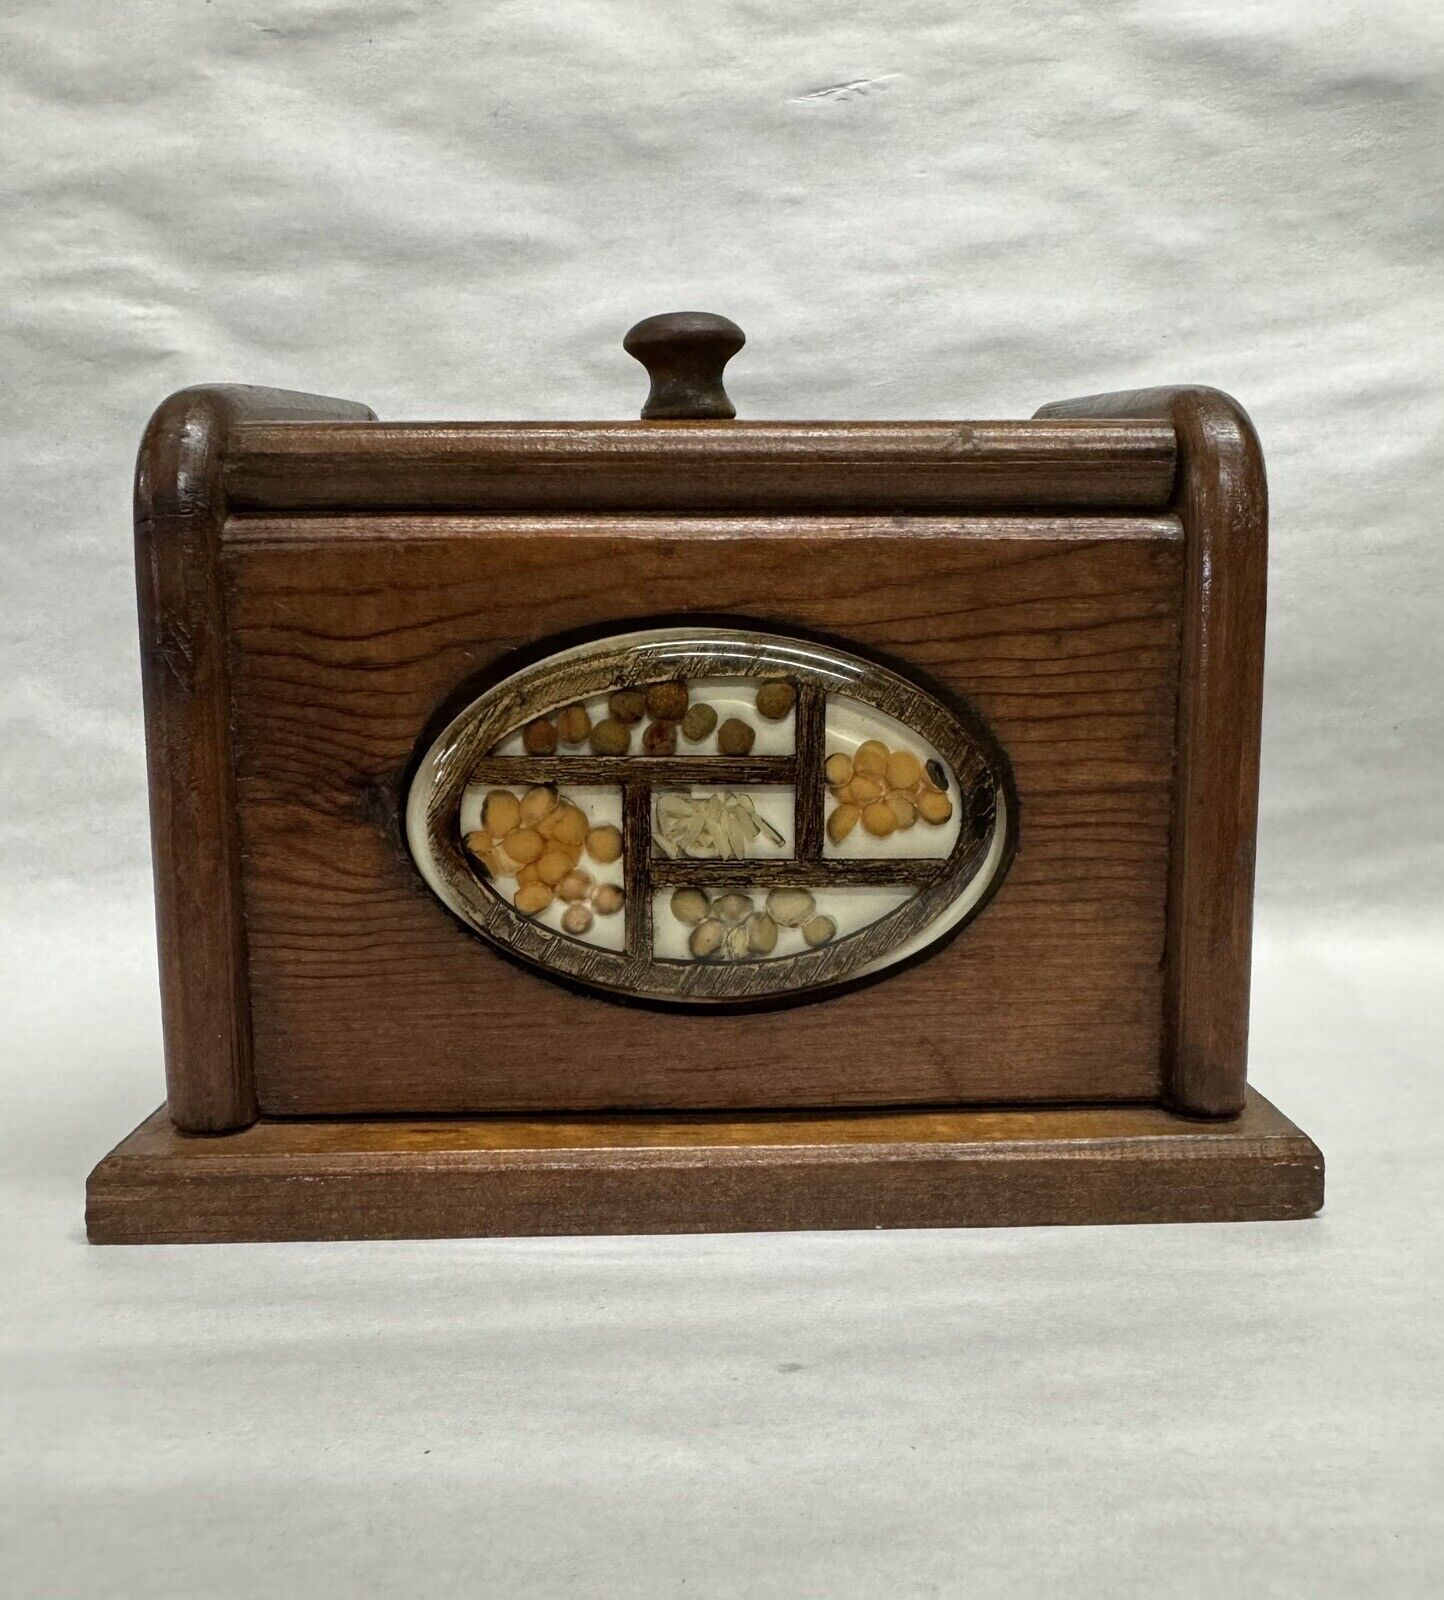 Vintage Wooden Recipe Box With Dried Seed Decoration.